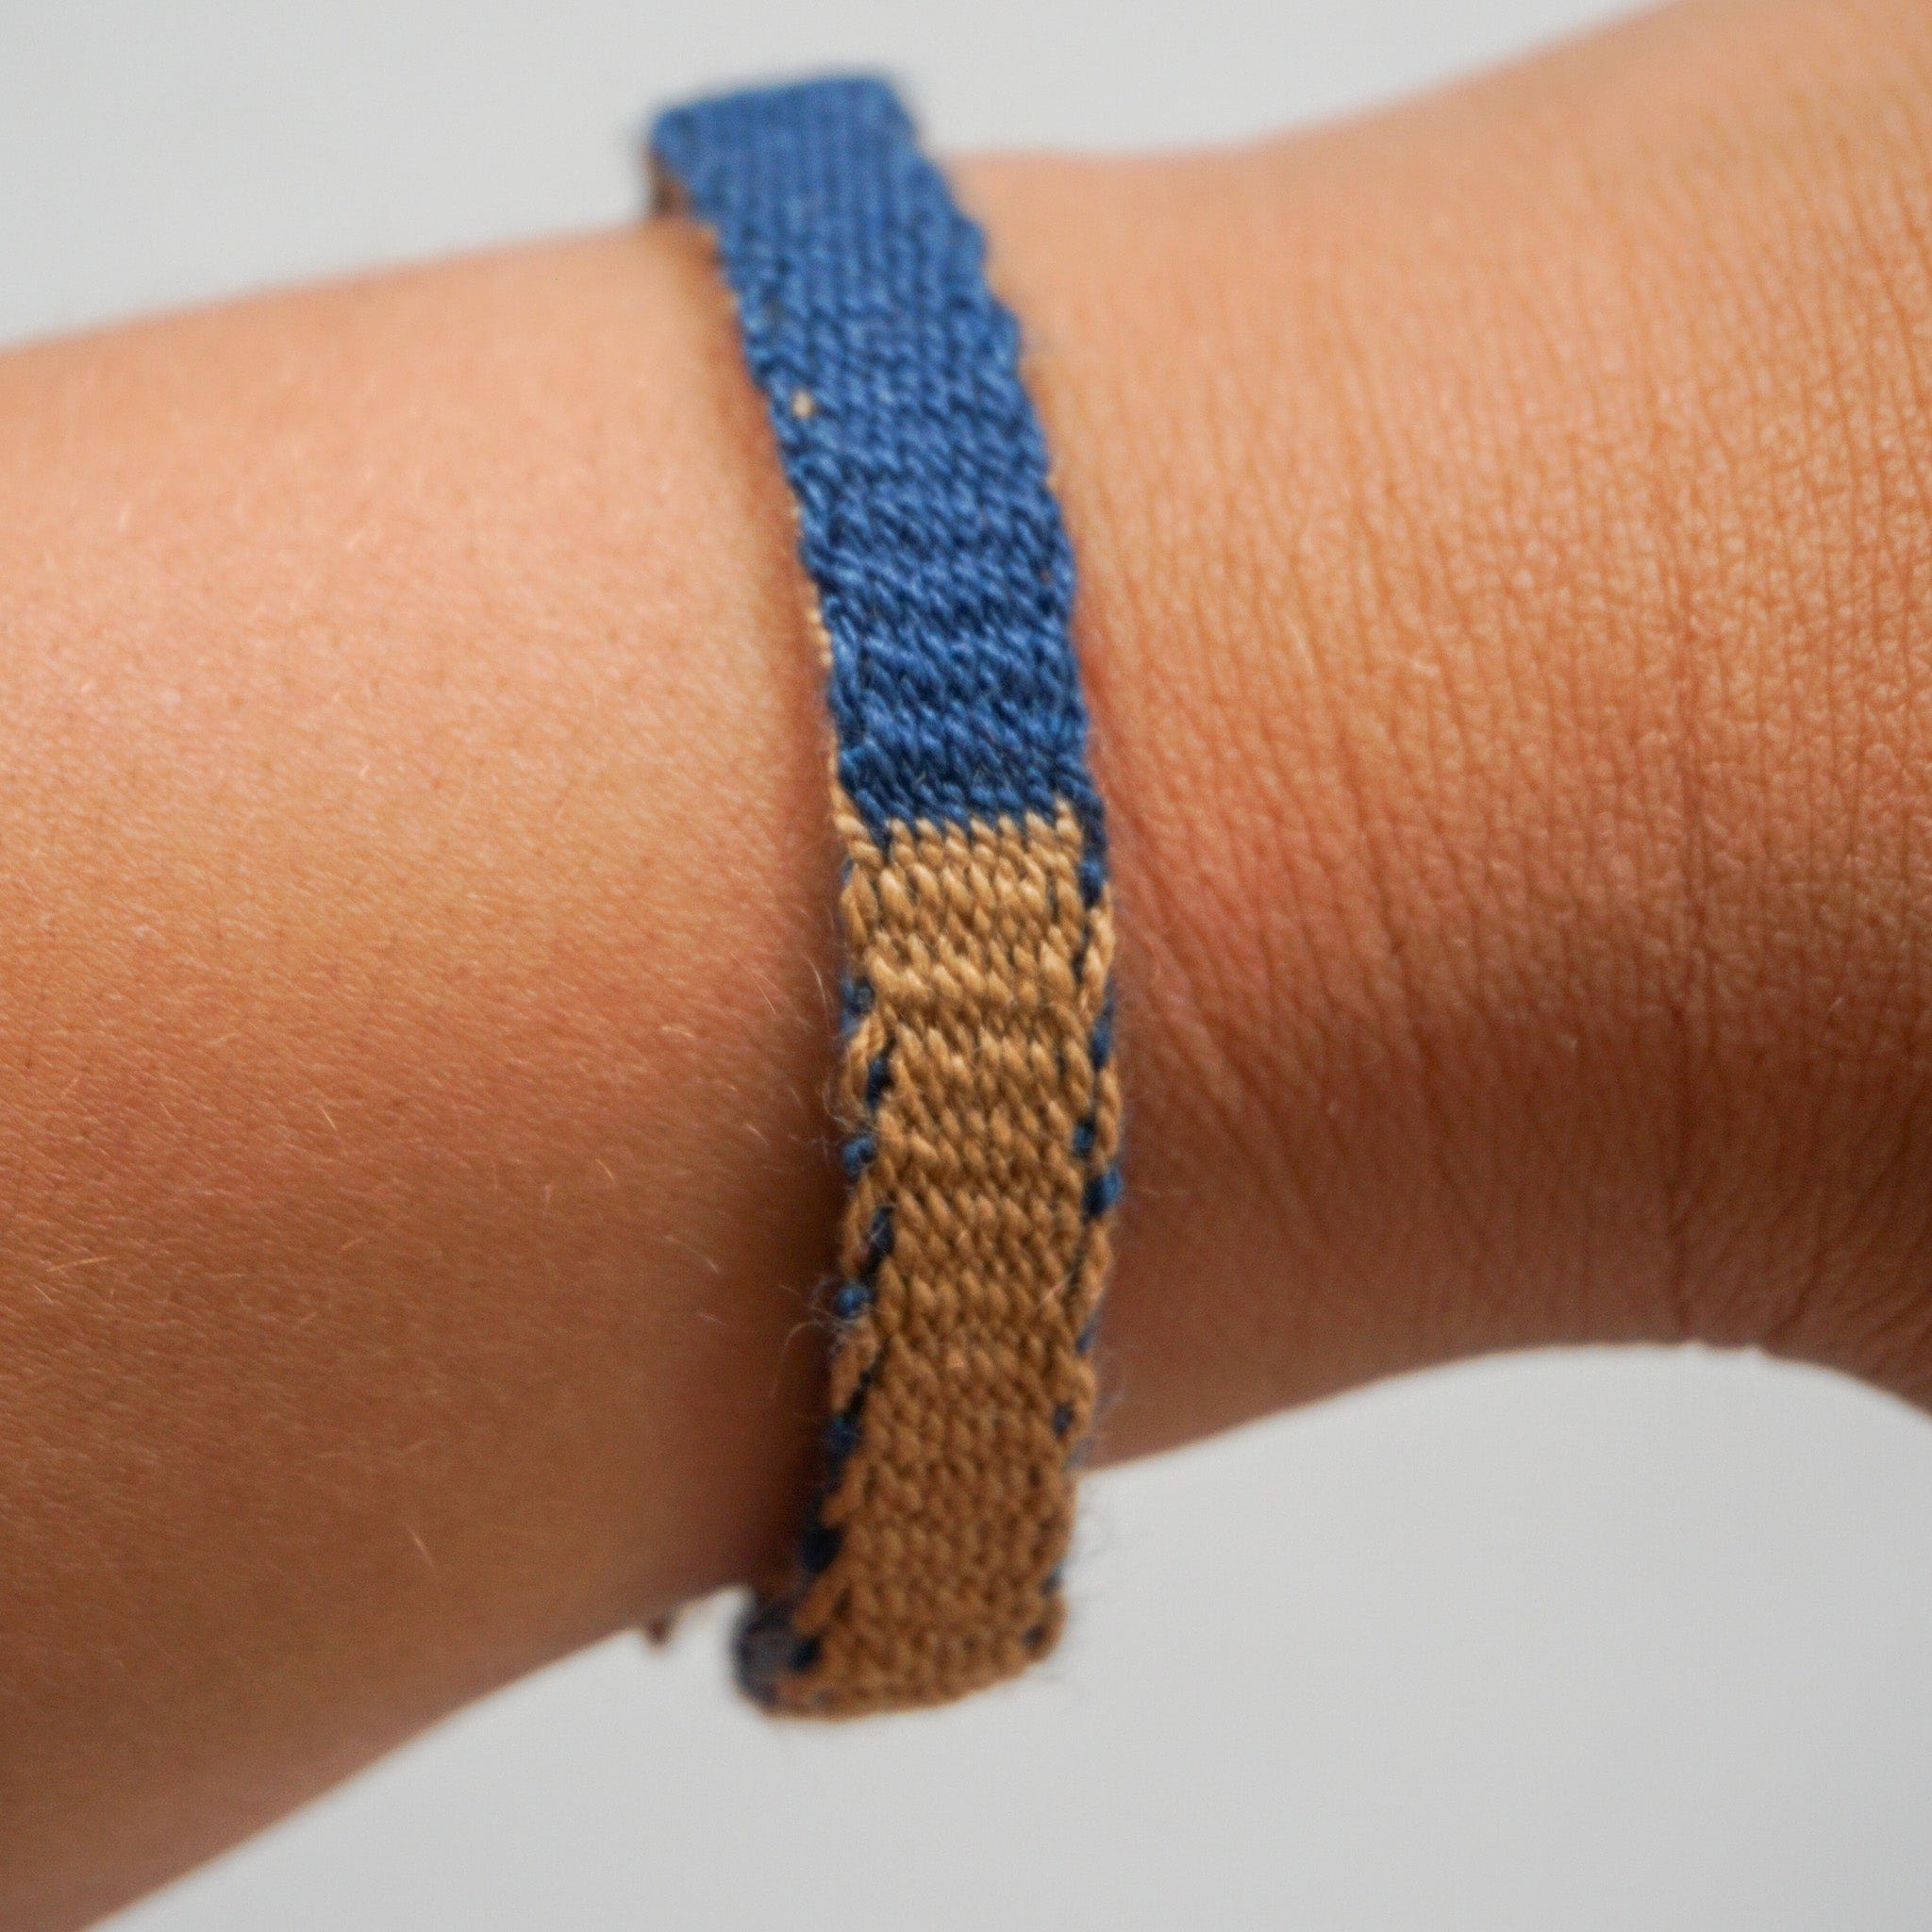 Guanabana Apparel & Accessories Woven Captain Bracelet by Guanabana in Natural and Blue